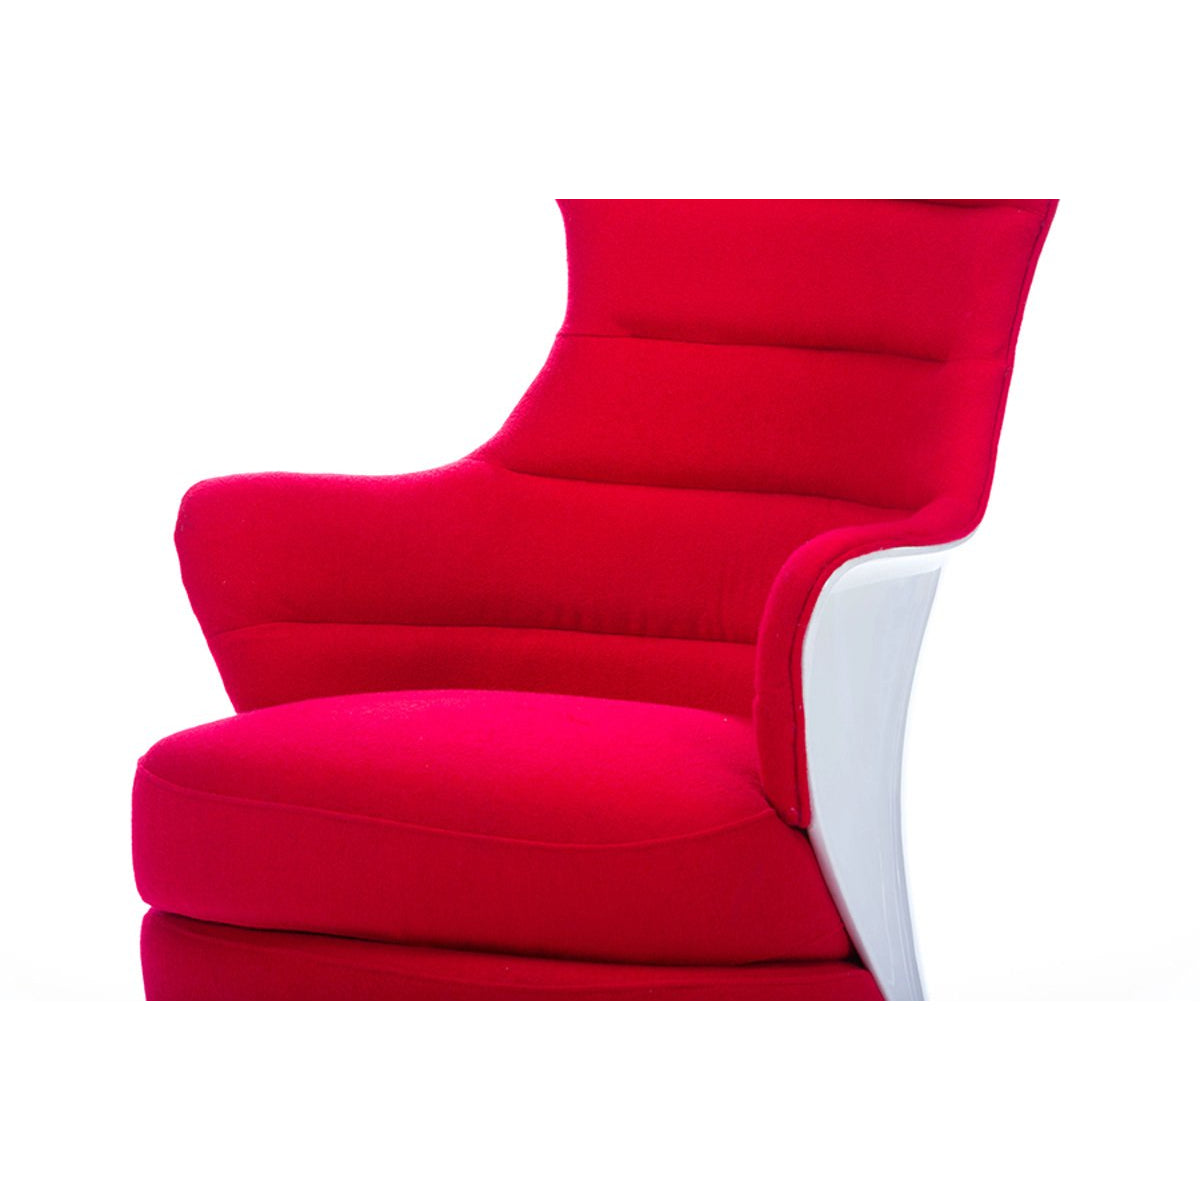 Baxton Studio Conundrum Red Fabric & White Plastic Contemporary Armchair Baxton Studio-chairs-Minimal And Modern - 4